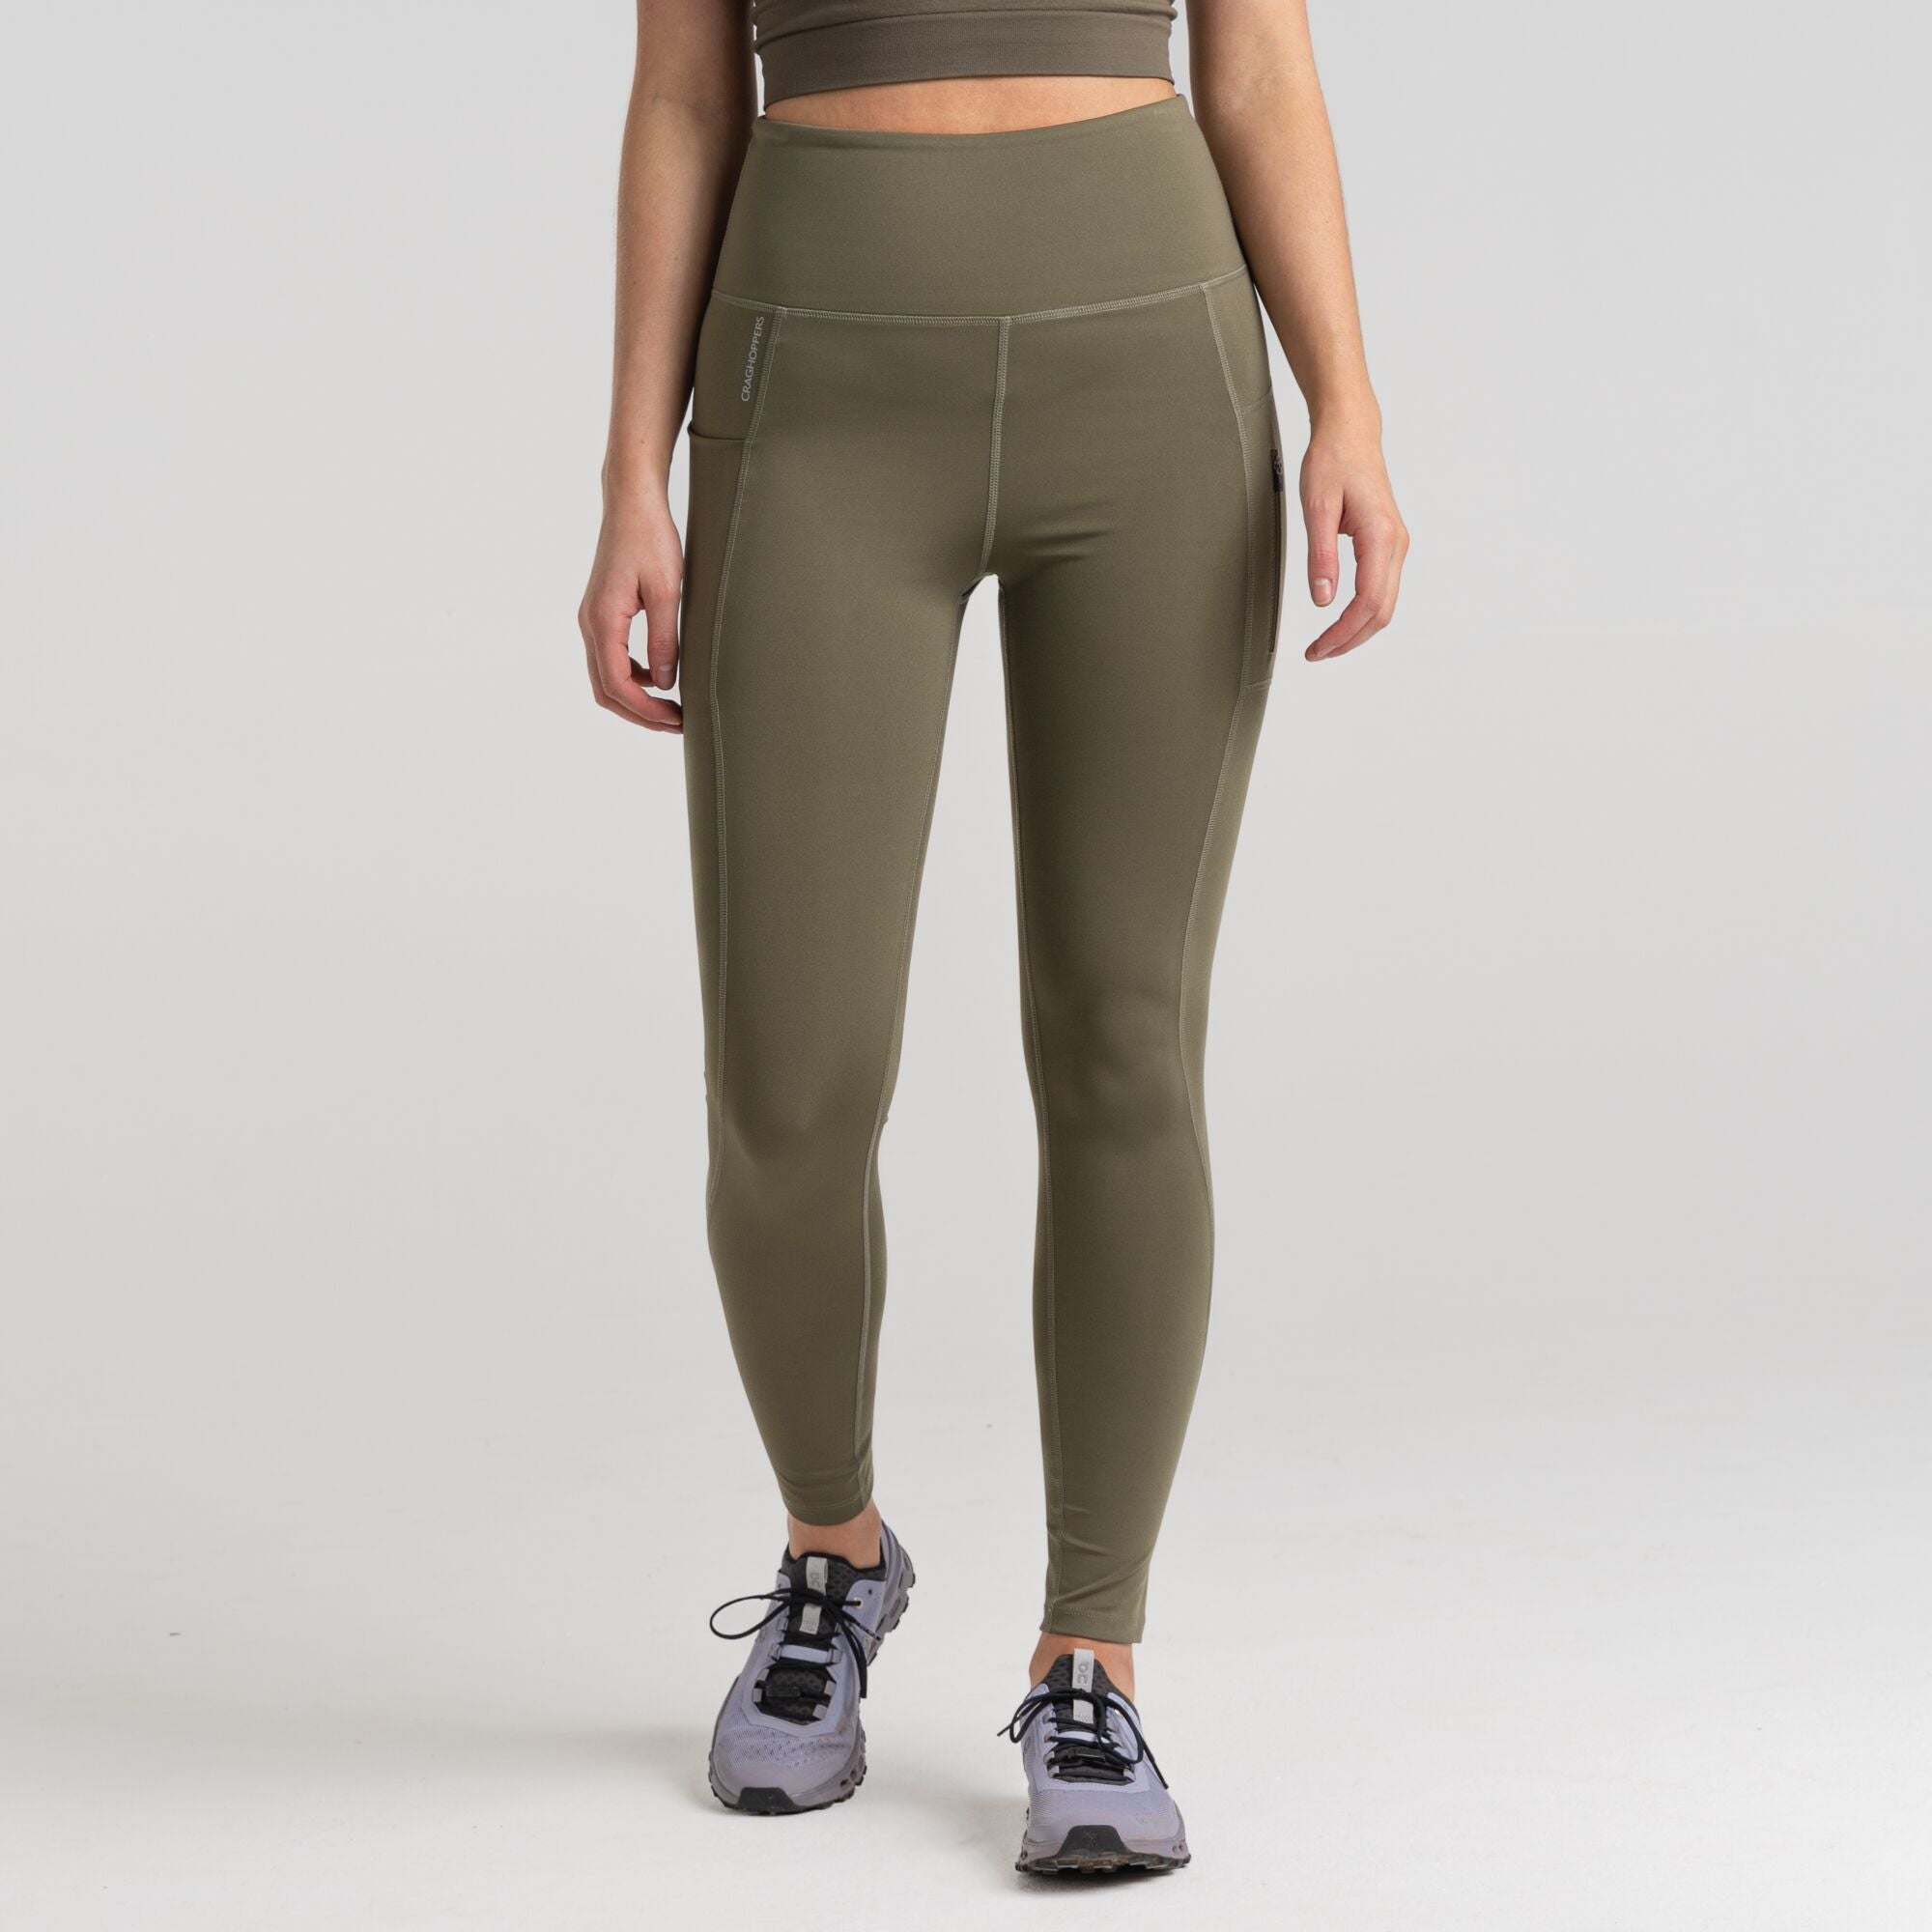 Women's Insect Shield® Pro Legging | Wild Olive